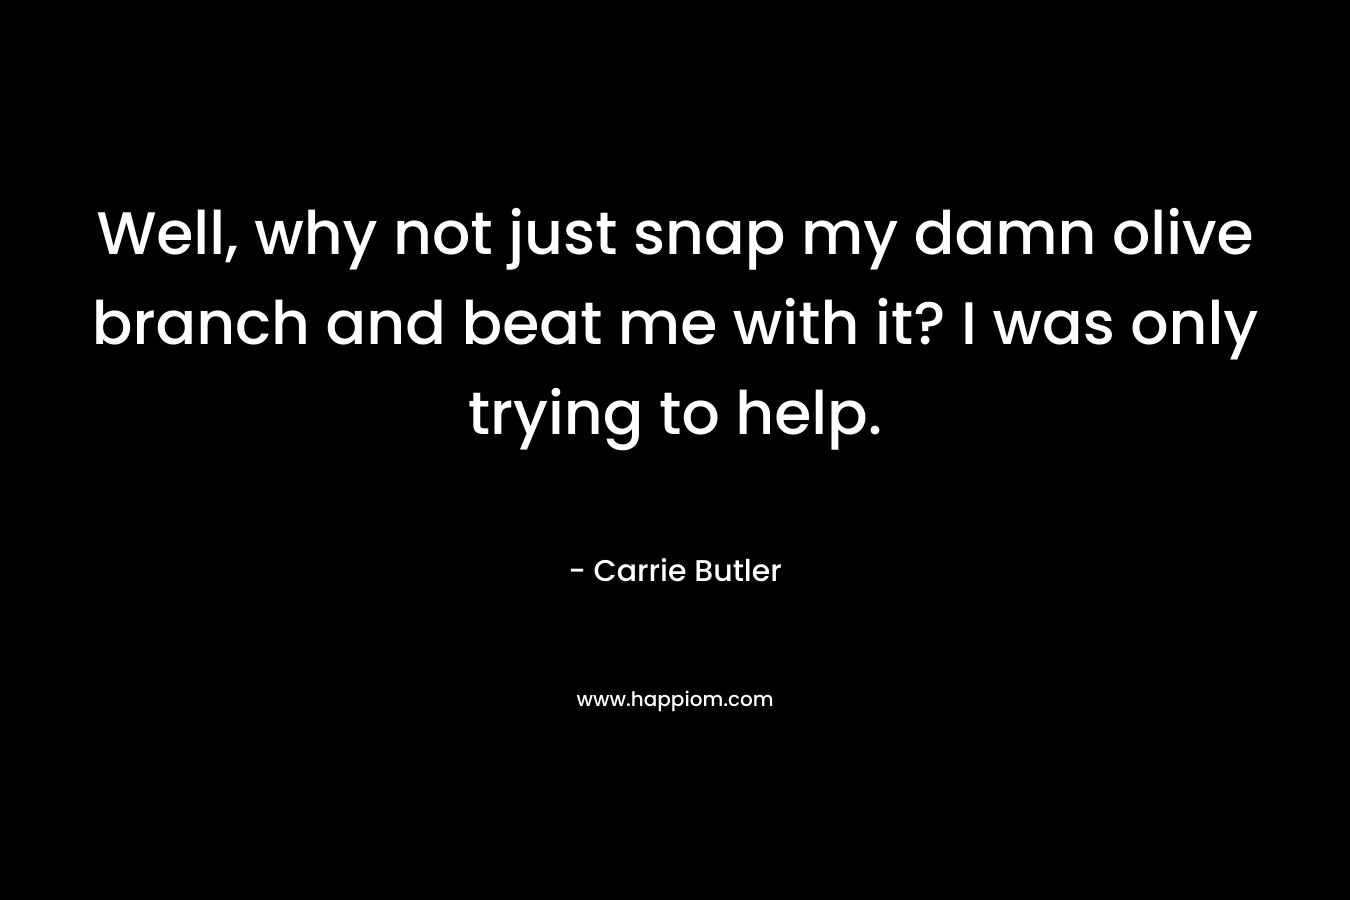 Well, why not just snap my damn olive branch and beat me with it? I was only trying to help. – Carrie Butler